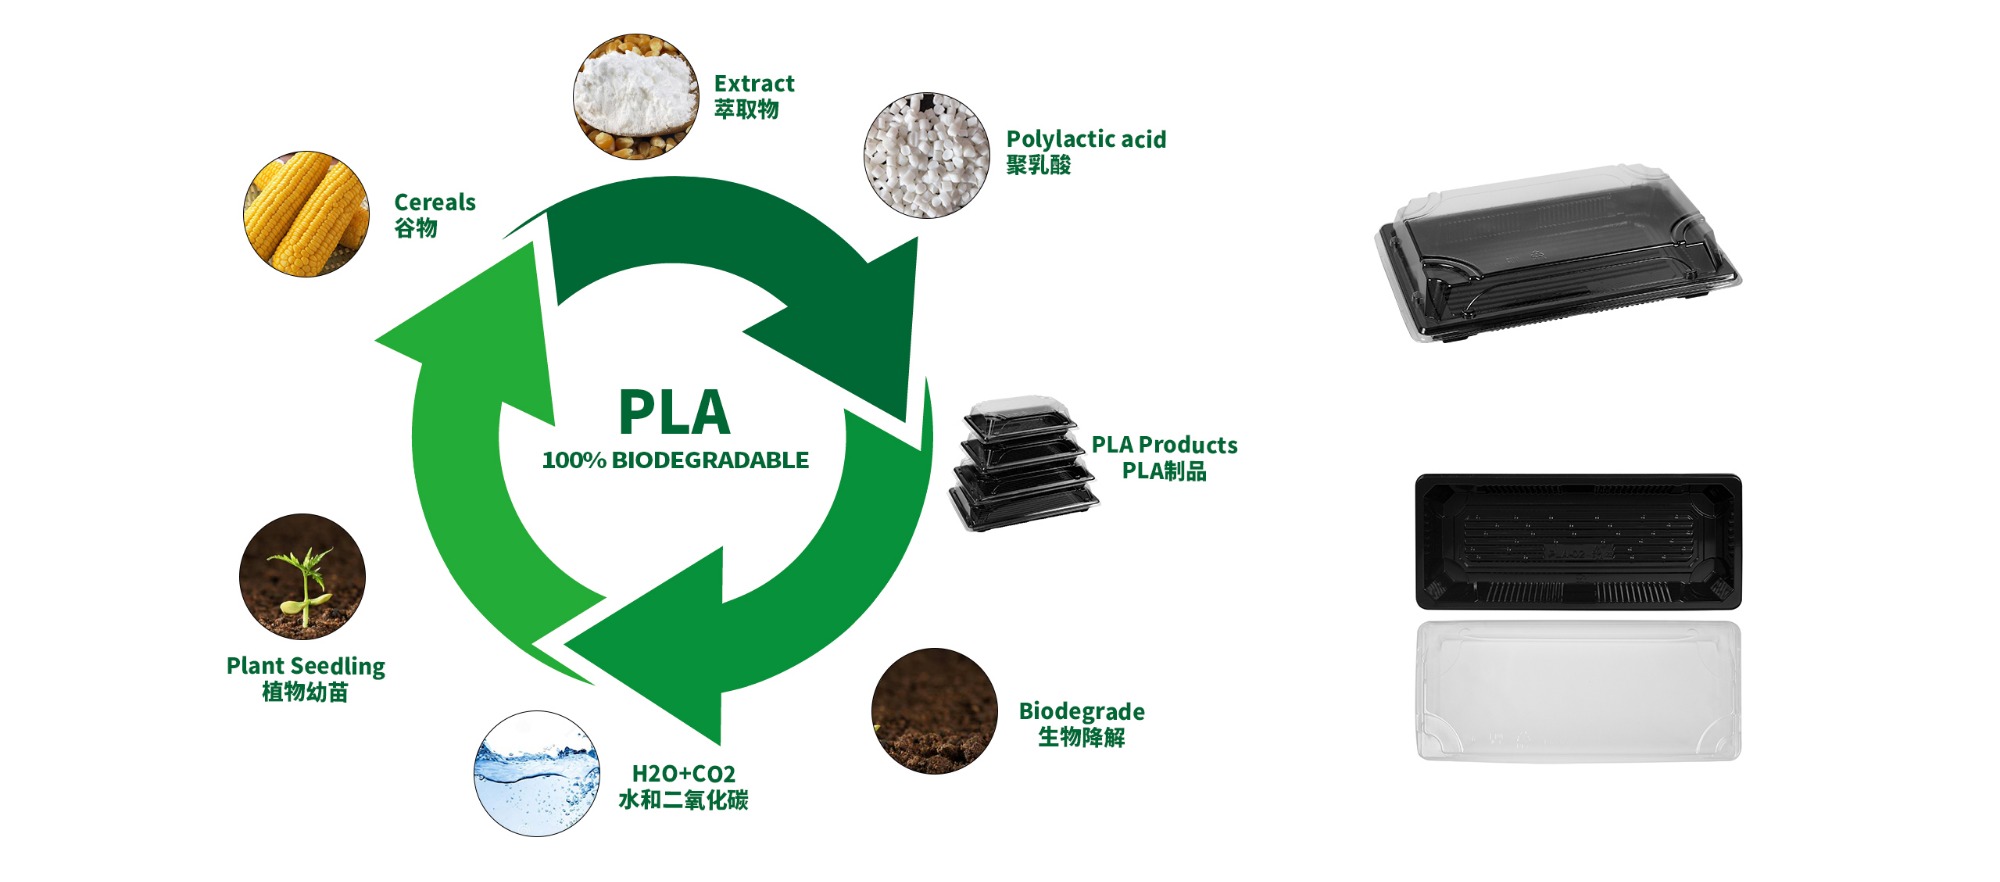 What’s PLA? The whole name is polylactic acid, which can be decomposed into water and carbon dioxide in specific condition.